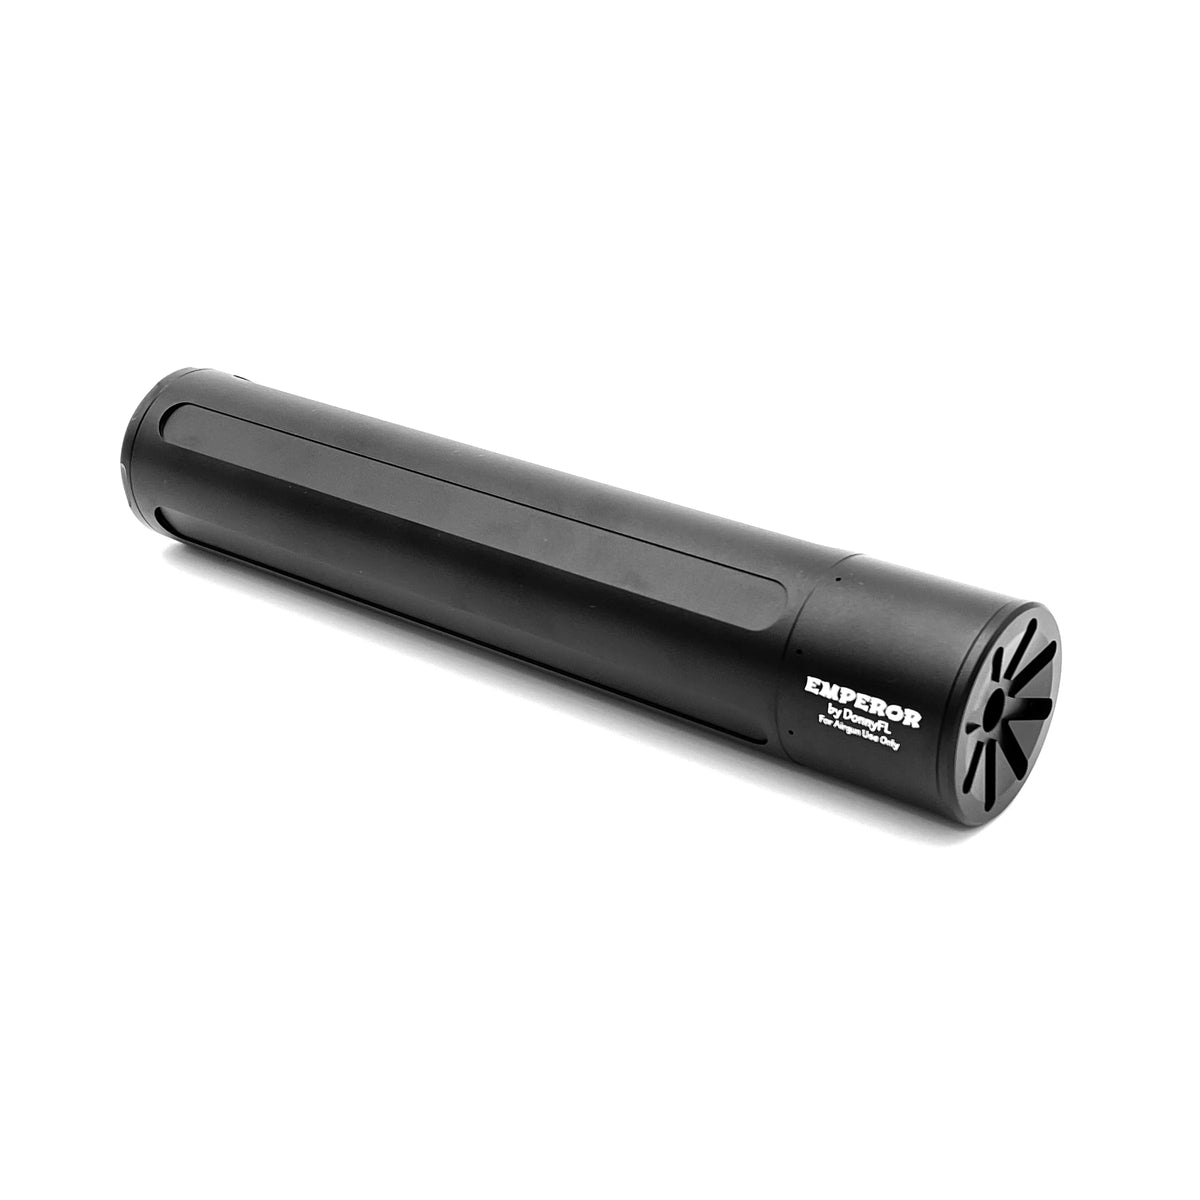 Silencer for HP MAX SS (.35 cal) —